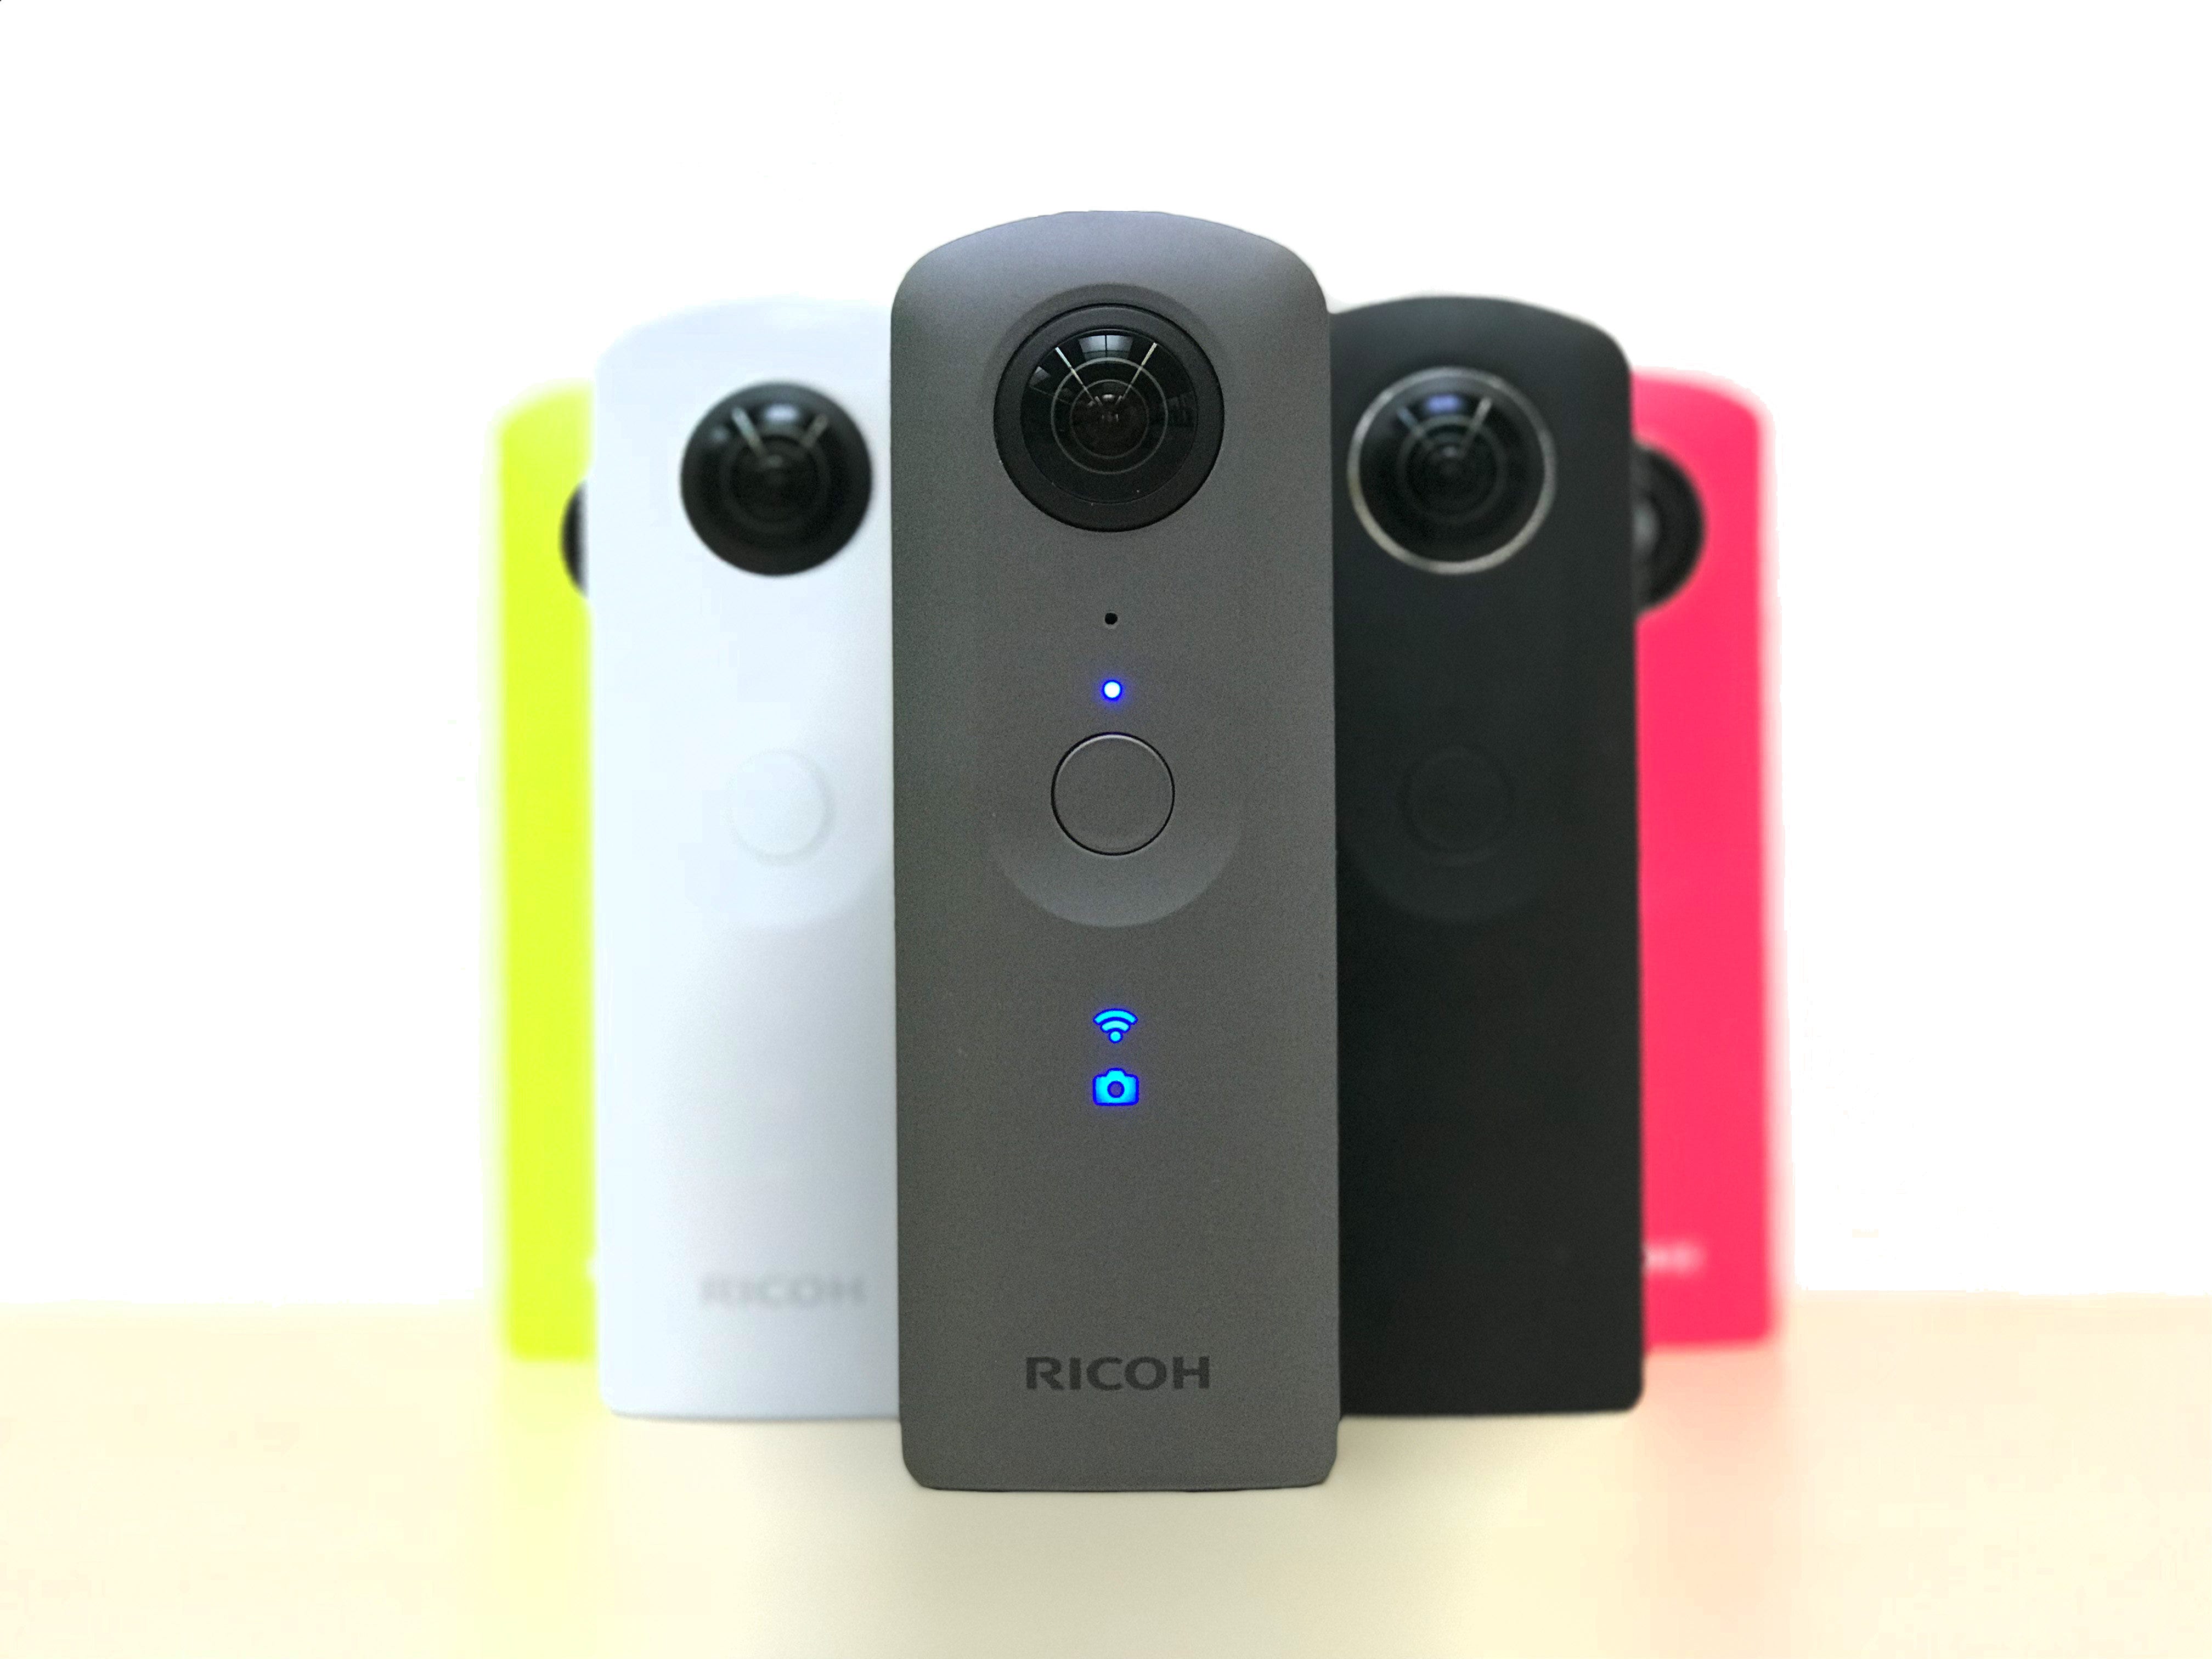 The Ricoh Theta V is here, and it's fast   by Martin Schmitz